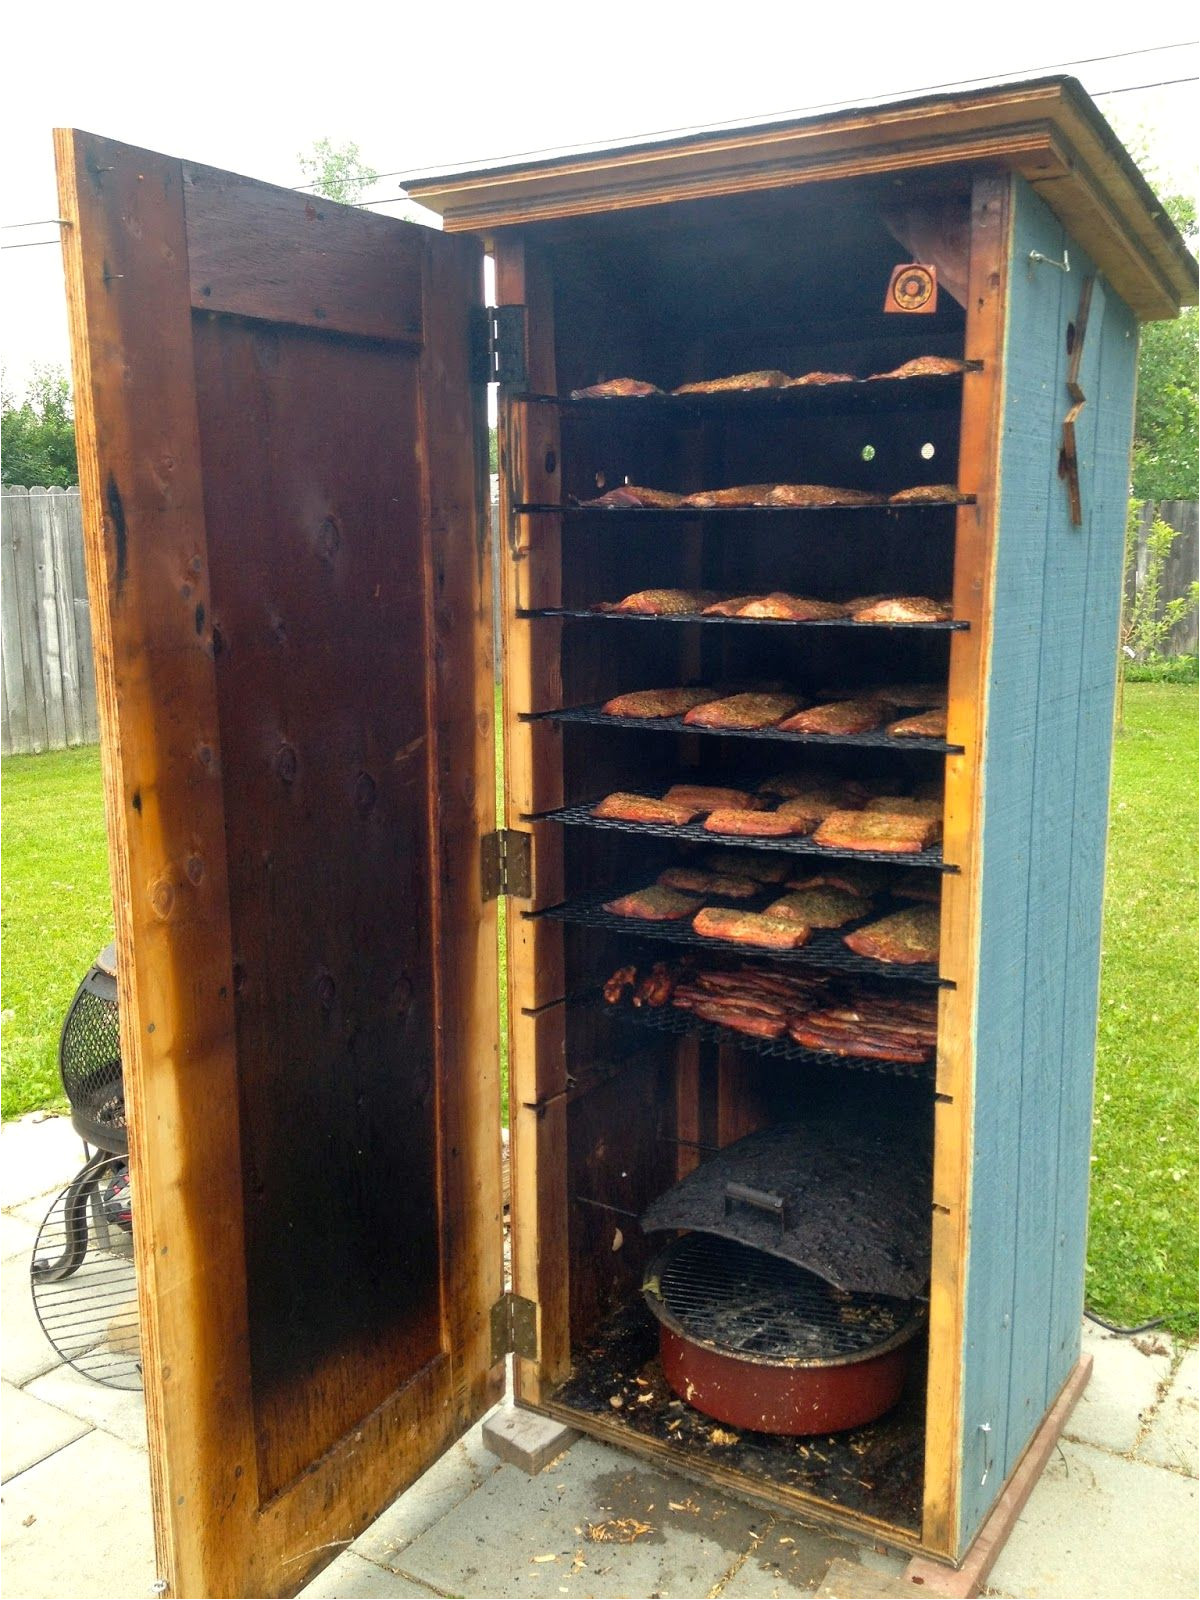 Home Smoker Plans 15 Homemade Smokers to Infuse Rich Flavor Into Bbq Meat or